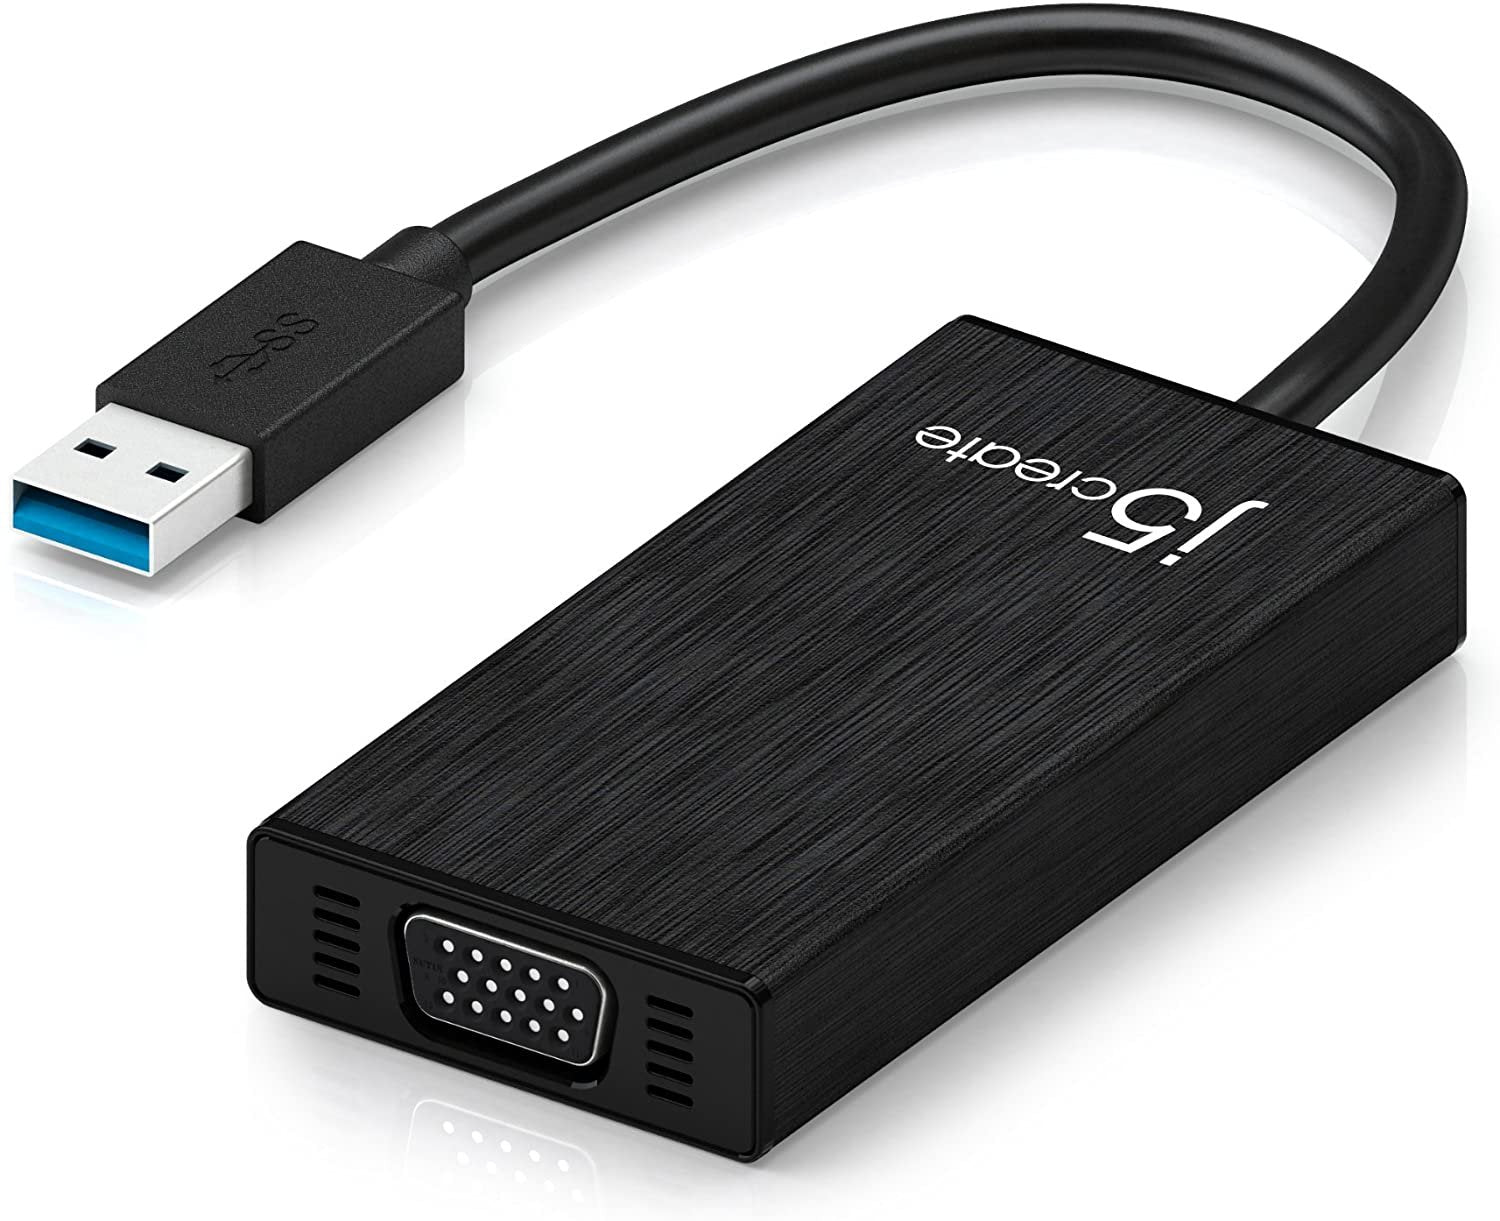 j5create USB 3.0 Multi-Adapter VGA/ 3-Port USB 3.0 HUB | Backwards Compatible with USB 2.0 and USB 1.1 Devices | USB to VGA Compatible with Windows and MAC OS